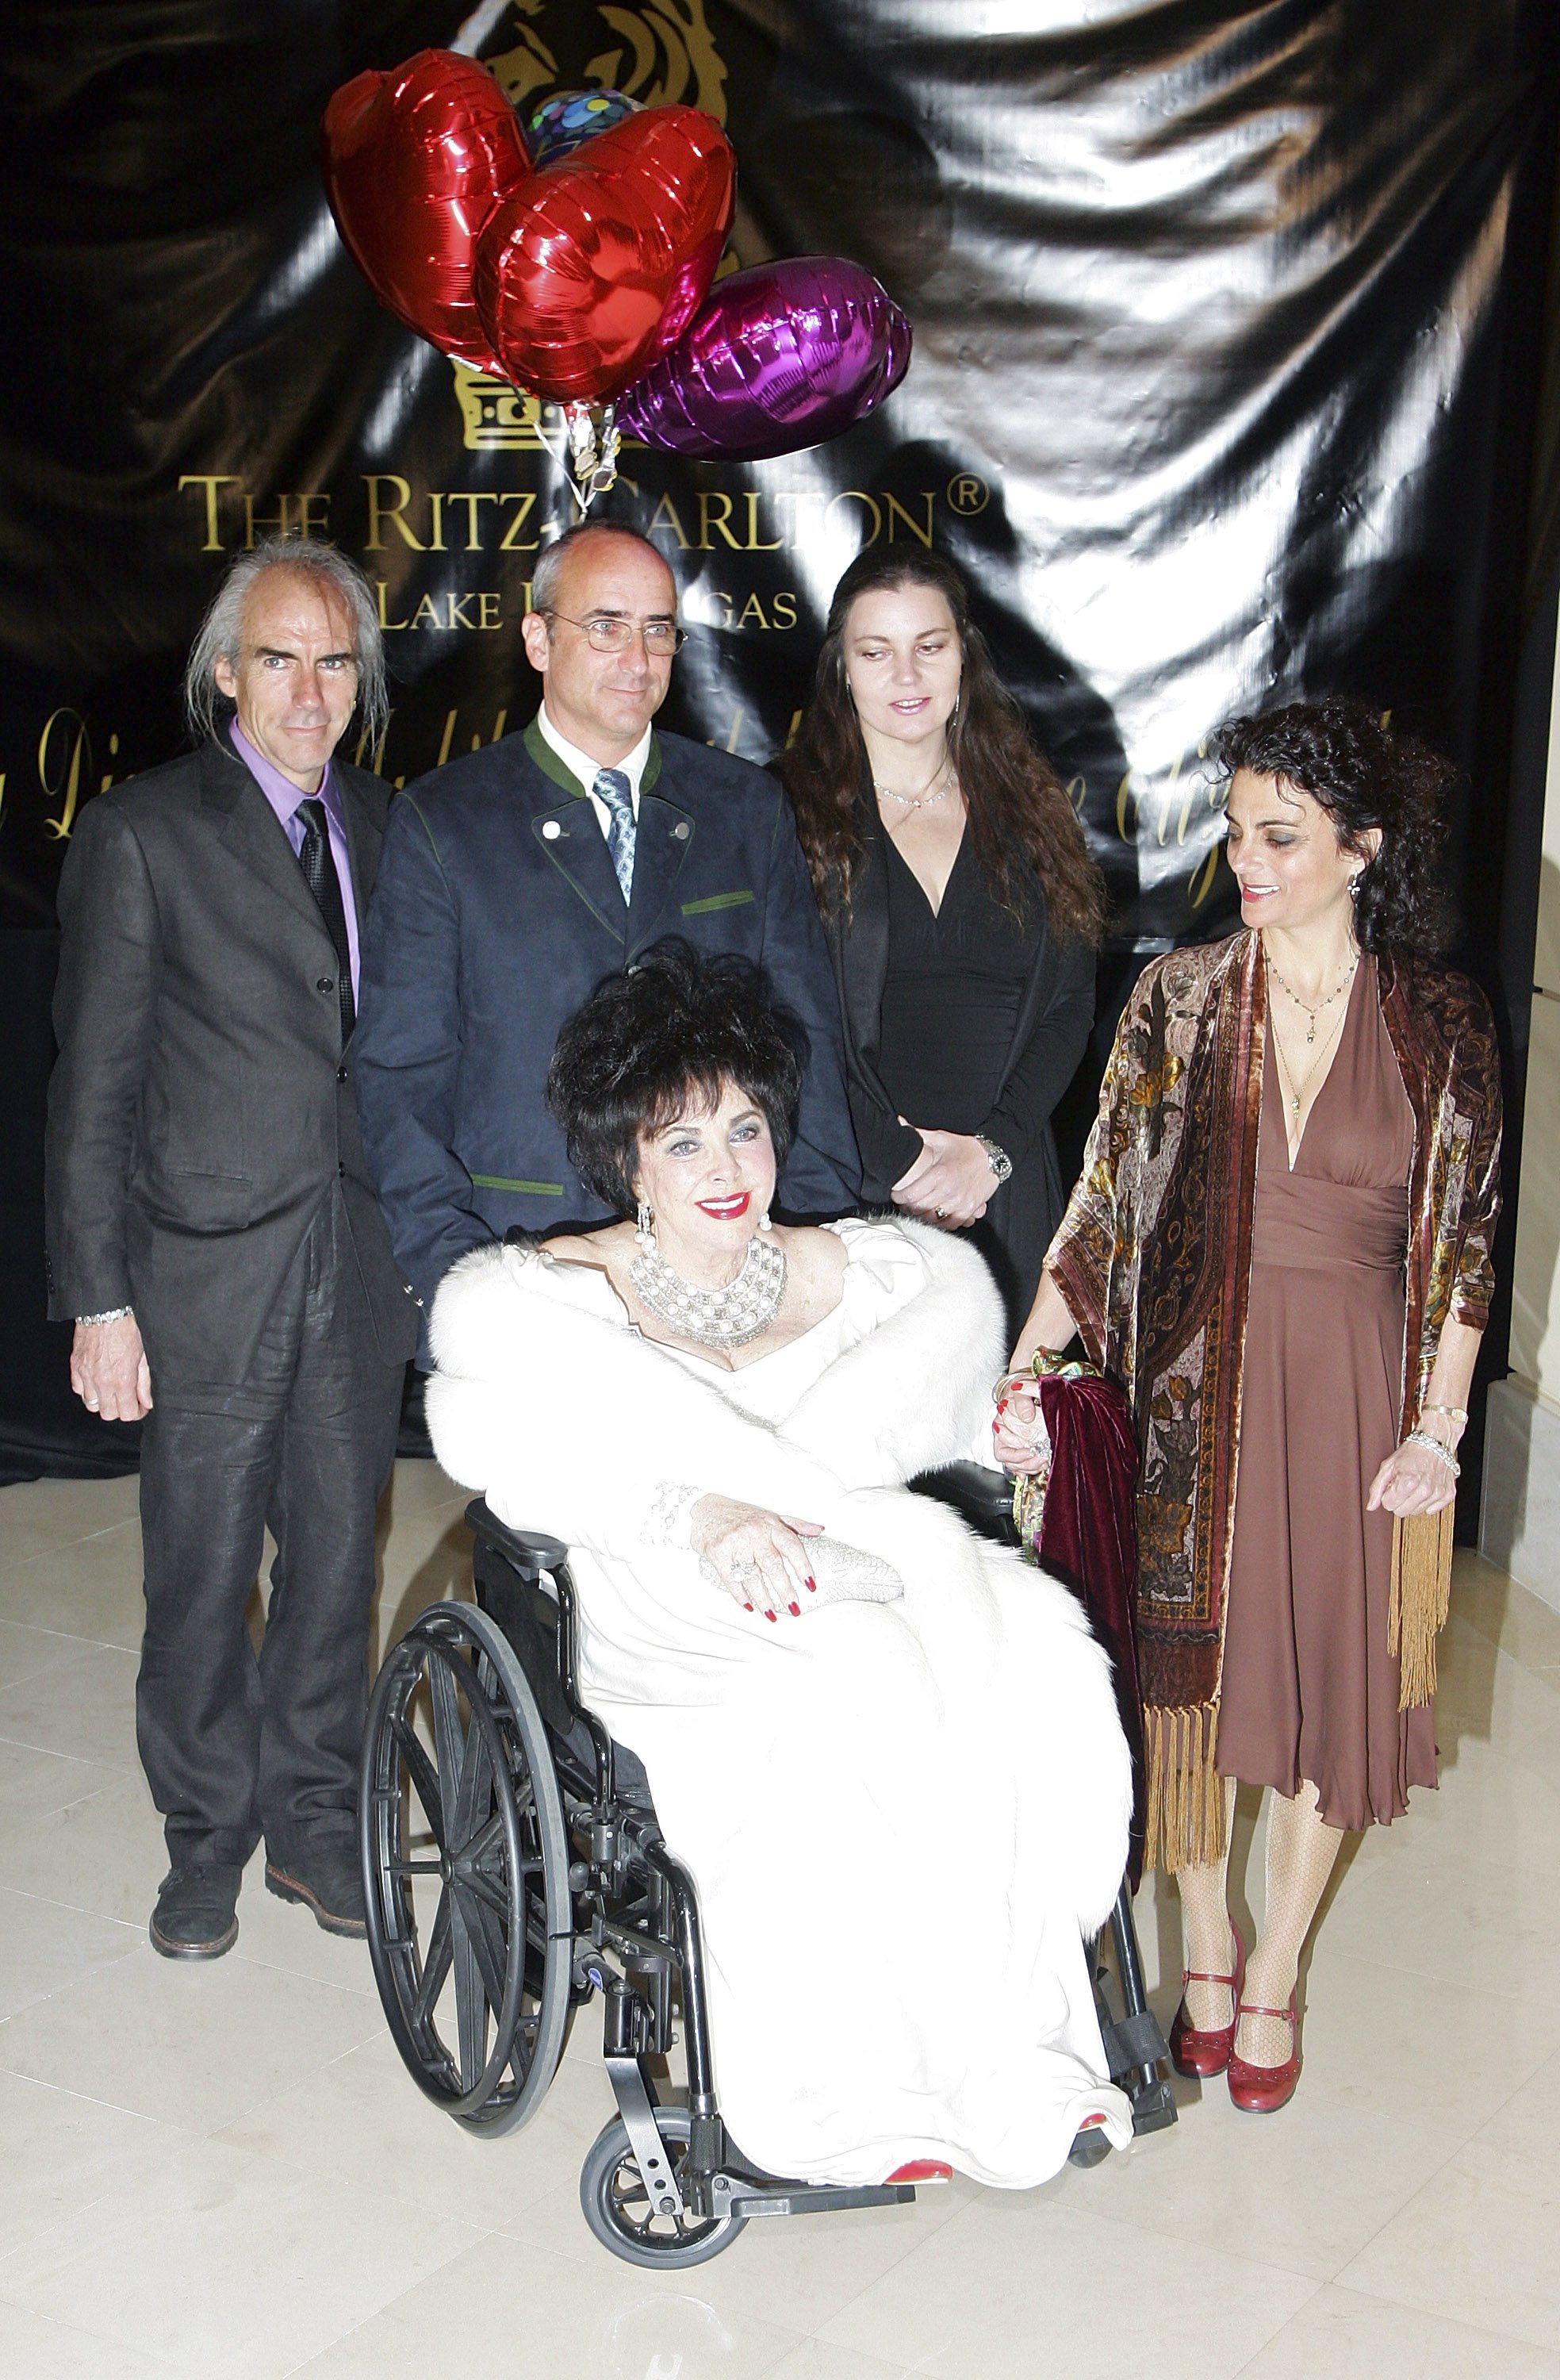 Dame Elizabeth Taylor arrives with her children, (L-R) Michael Wilding Jr., Christopher Wilding, Maria Burton and Liza Todd Burton, for Taylor's 75th birthday party at the Ritz-Carlton, Lake Las Vegas on February 27, 2007 in Henderson, Nevada. | Source: Getty Images